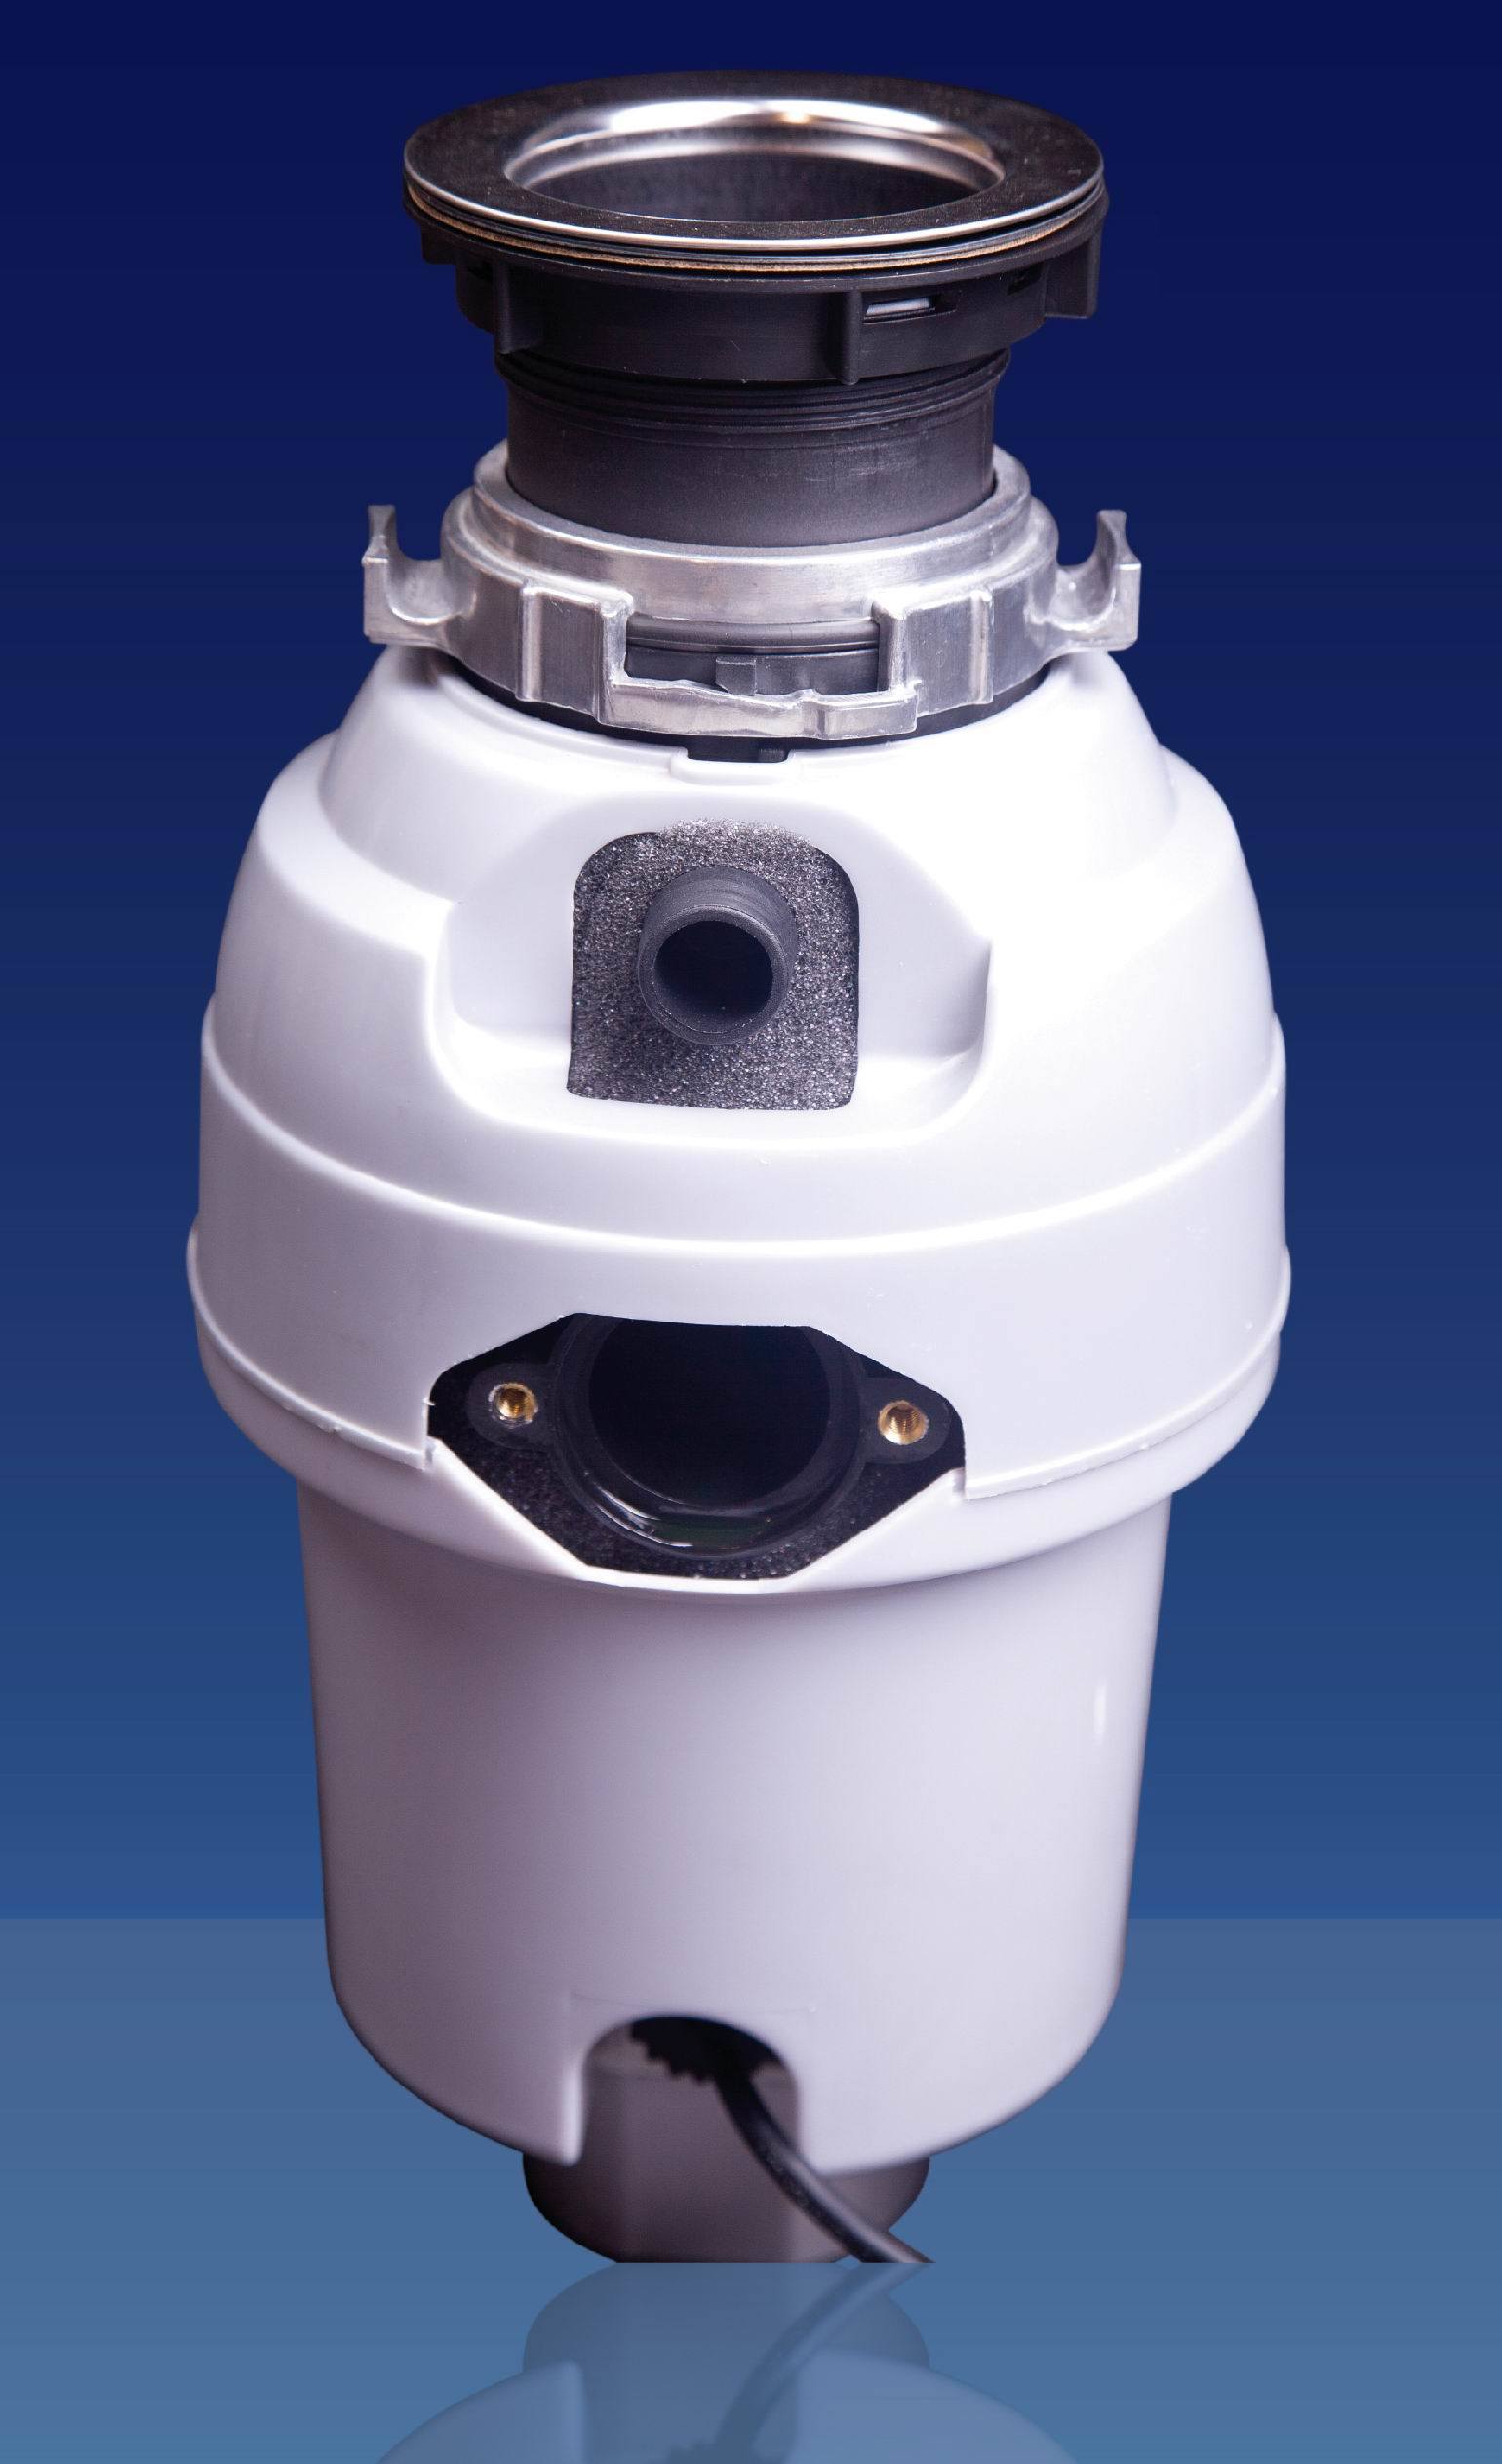 High Quality Kitchen Appliance Food Waste Disposer (Jft-468A)